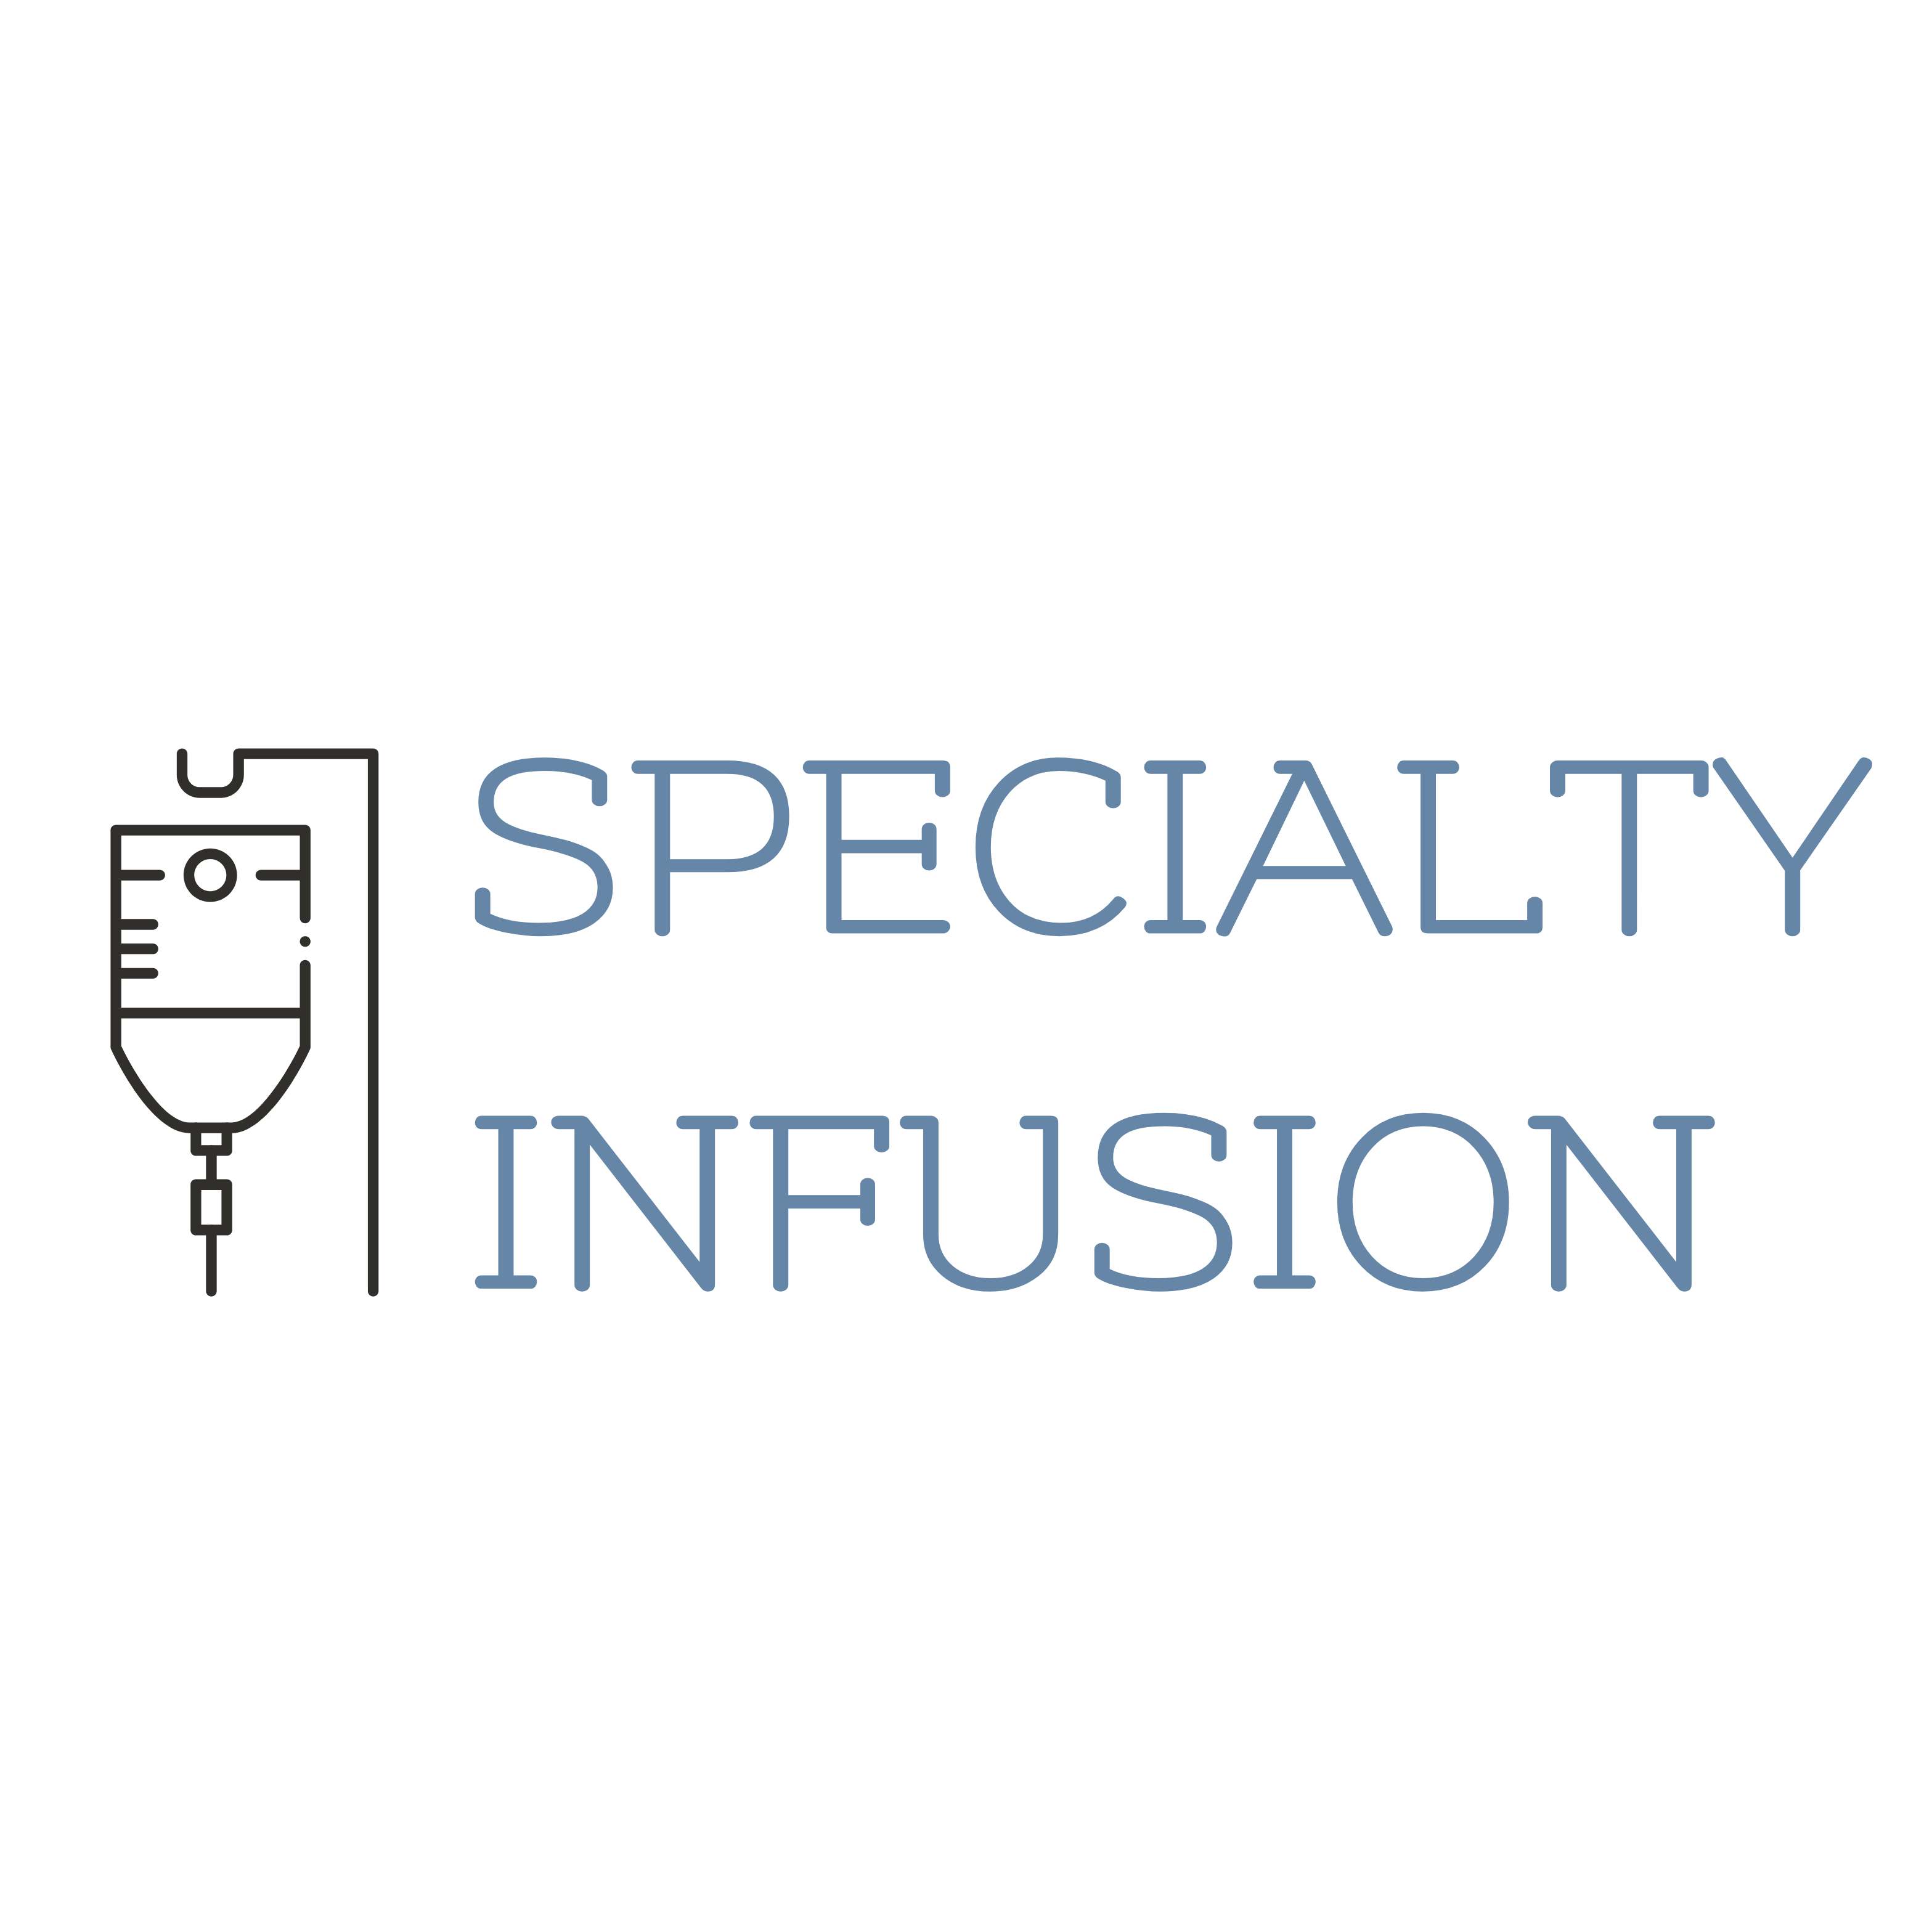 Specialty Infusion Photo